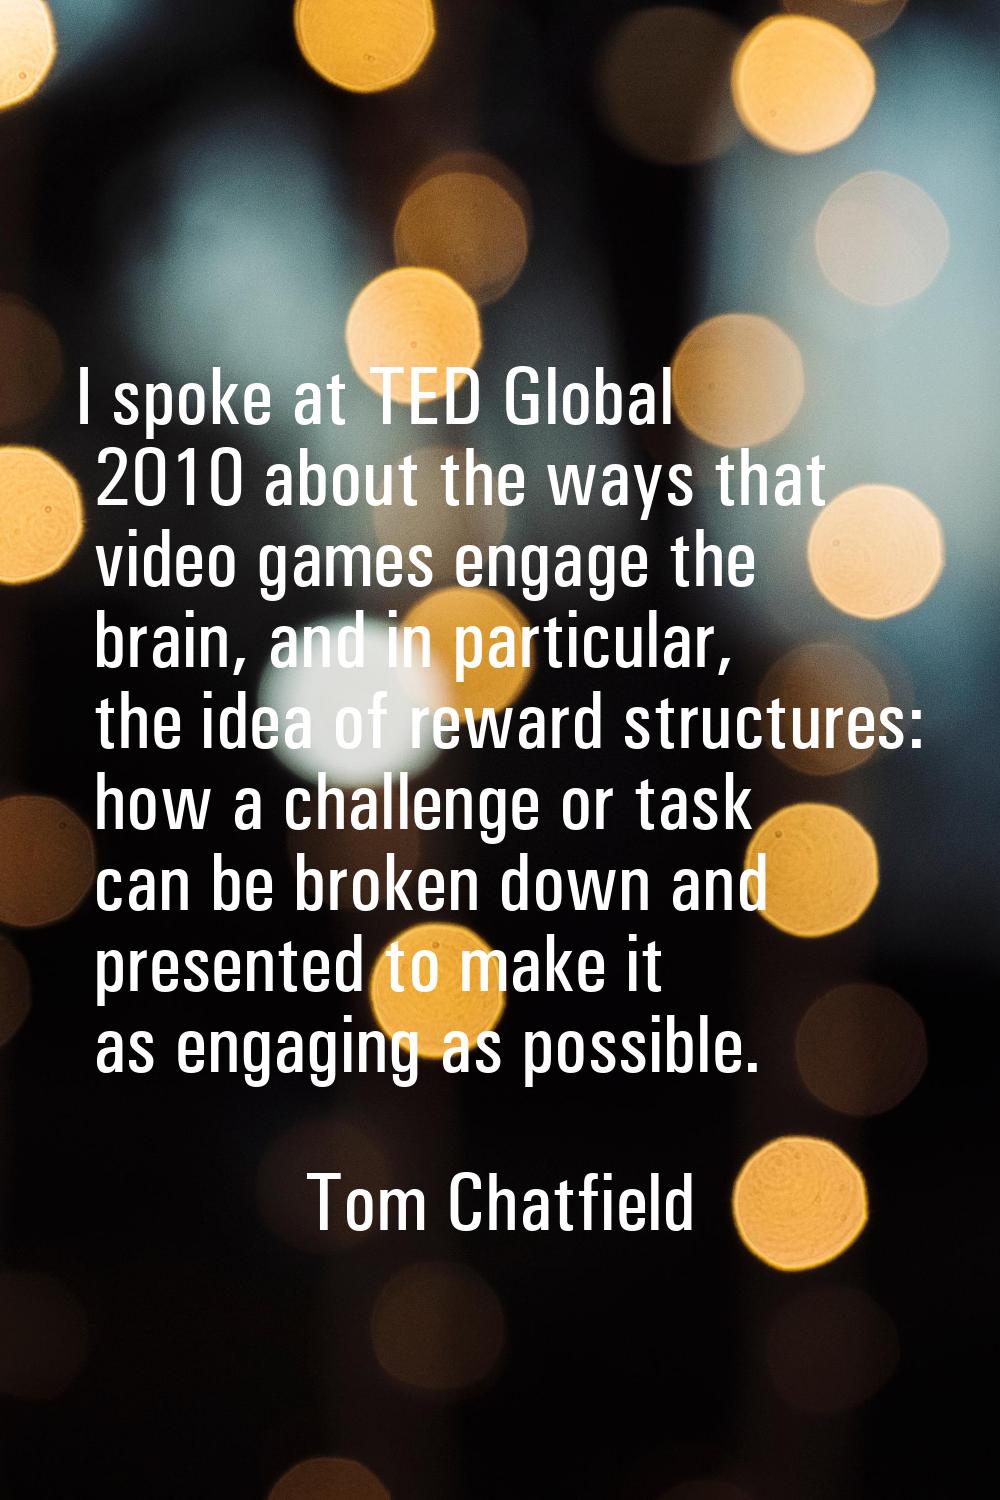 I spoke at TED Global 2010 about the ways that video games engage the brain, and in particular, the